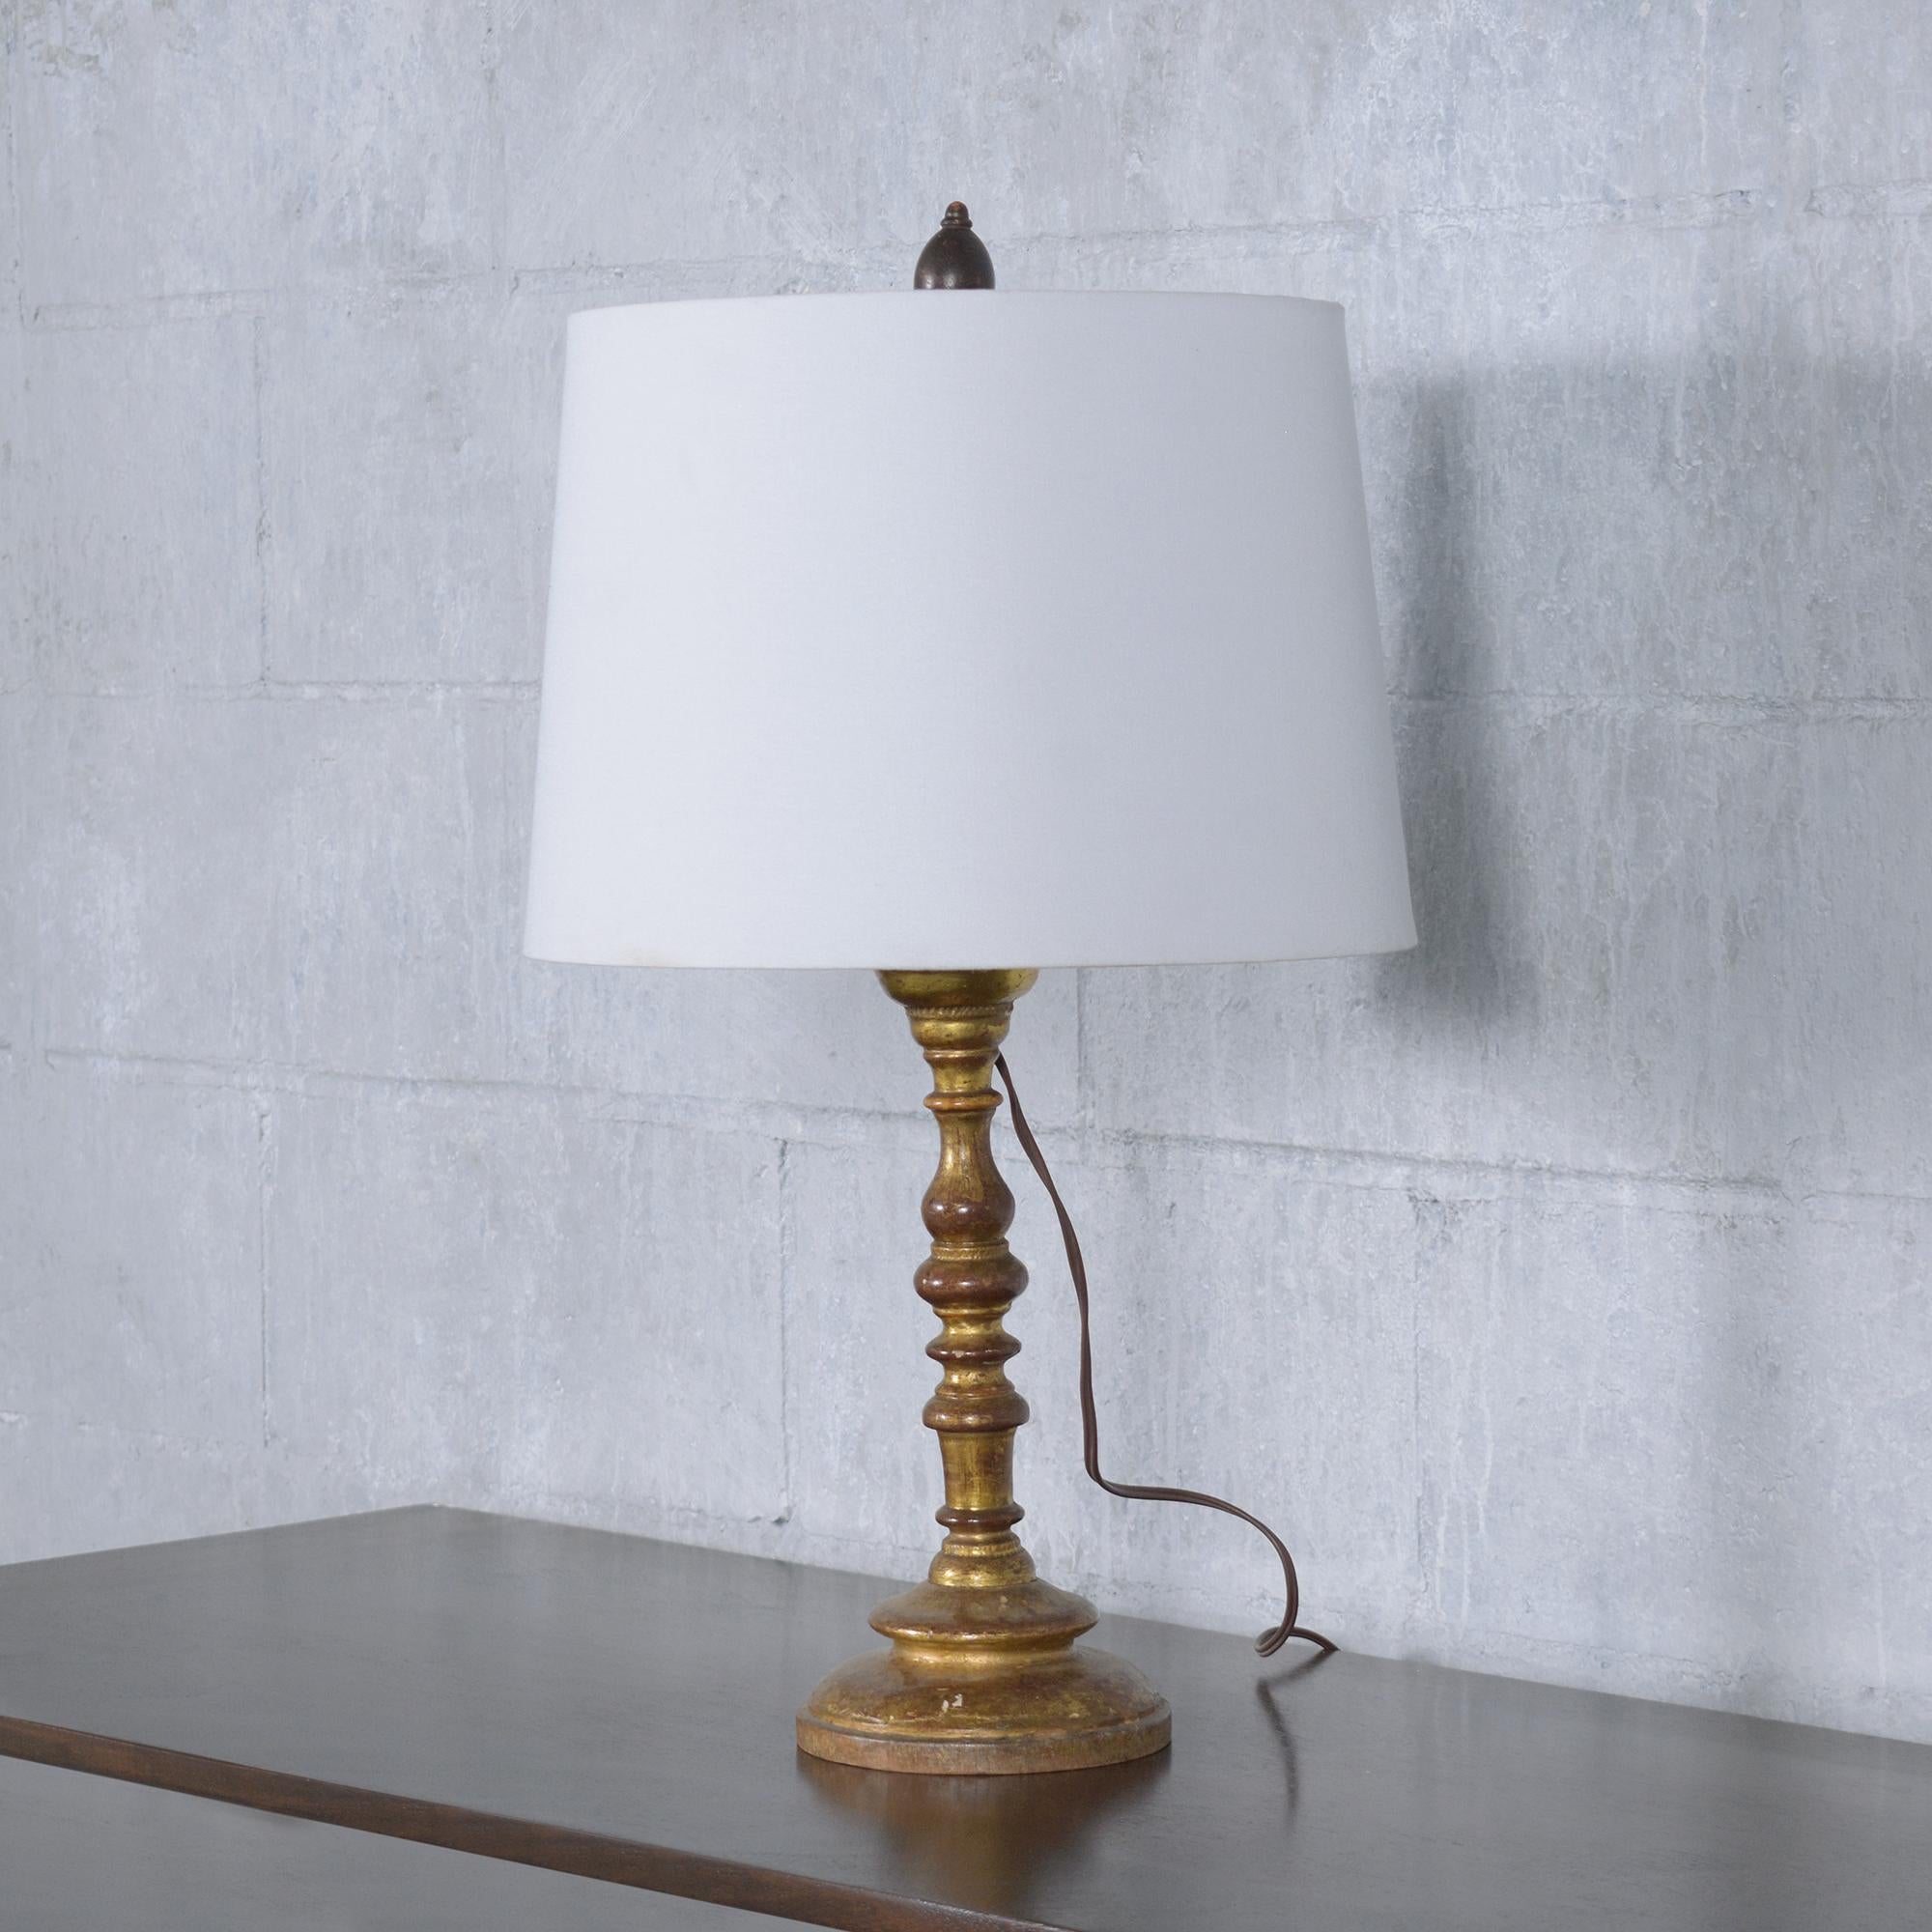 Lacquer 19th-Century Hand-Crafted Giltwood Table Lamp with New Off-White Shade